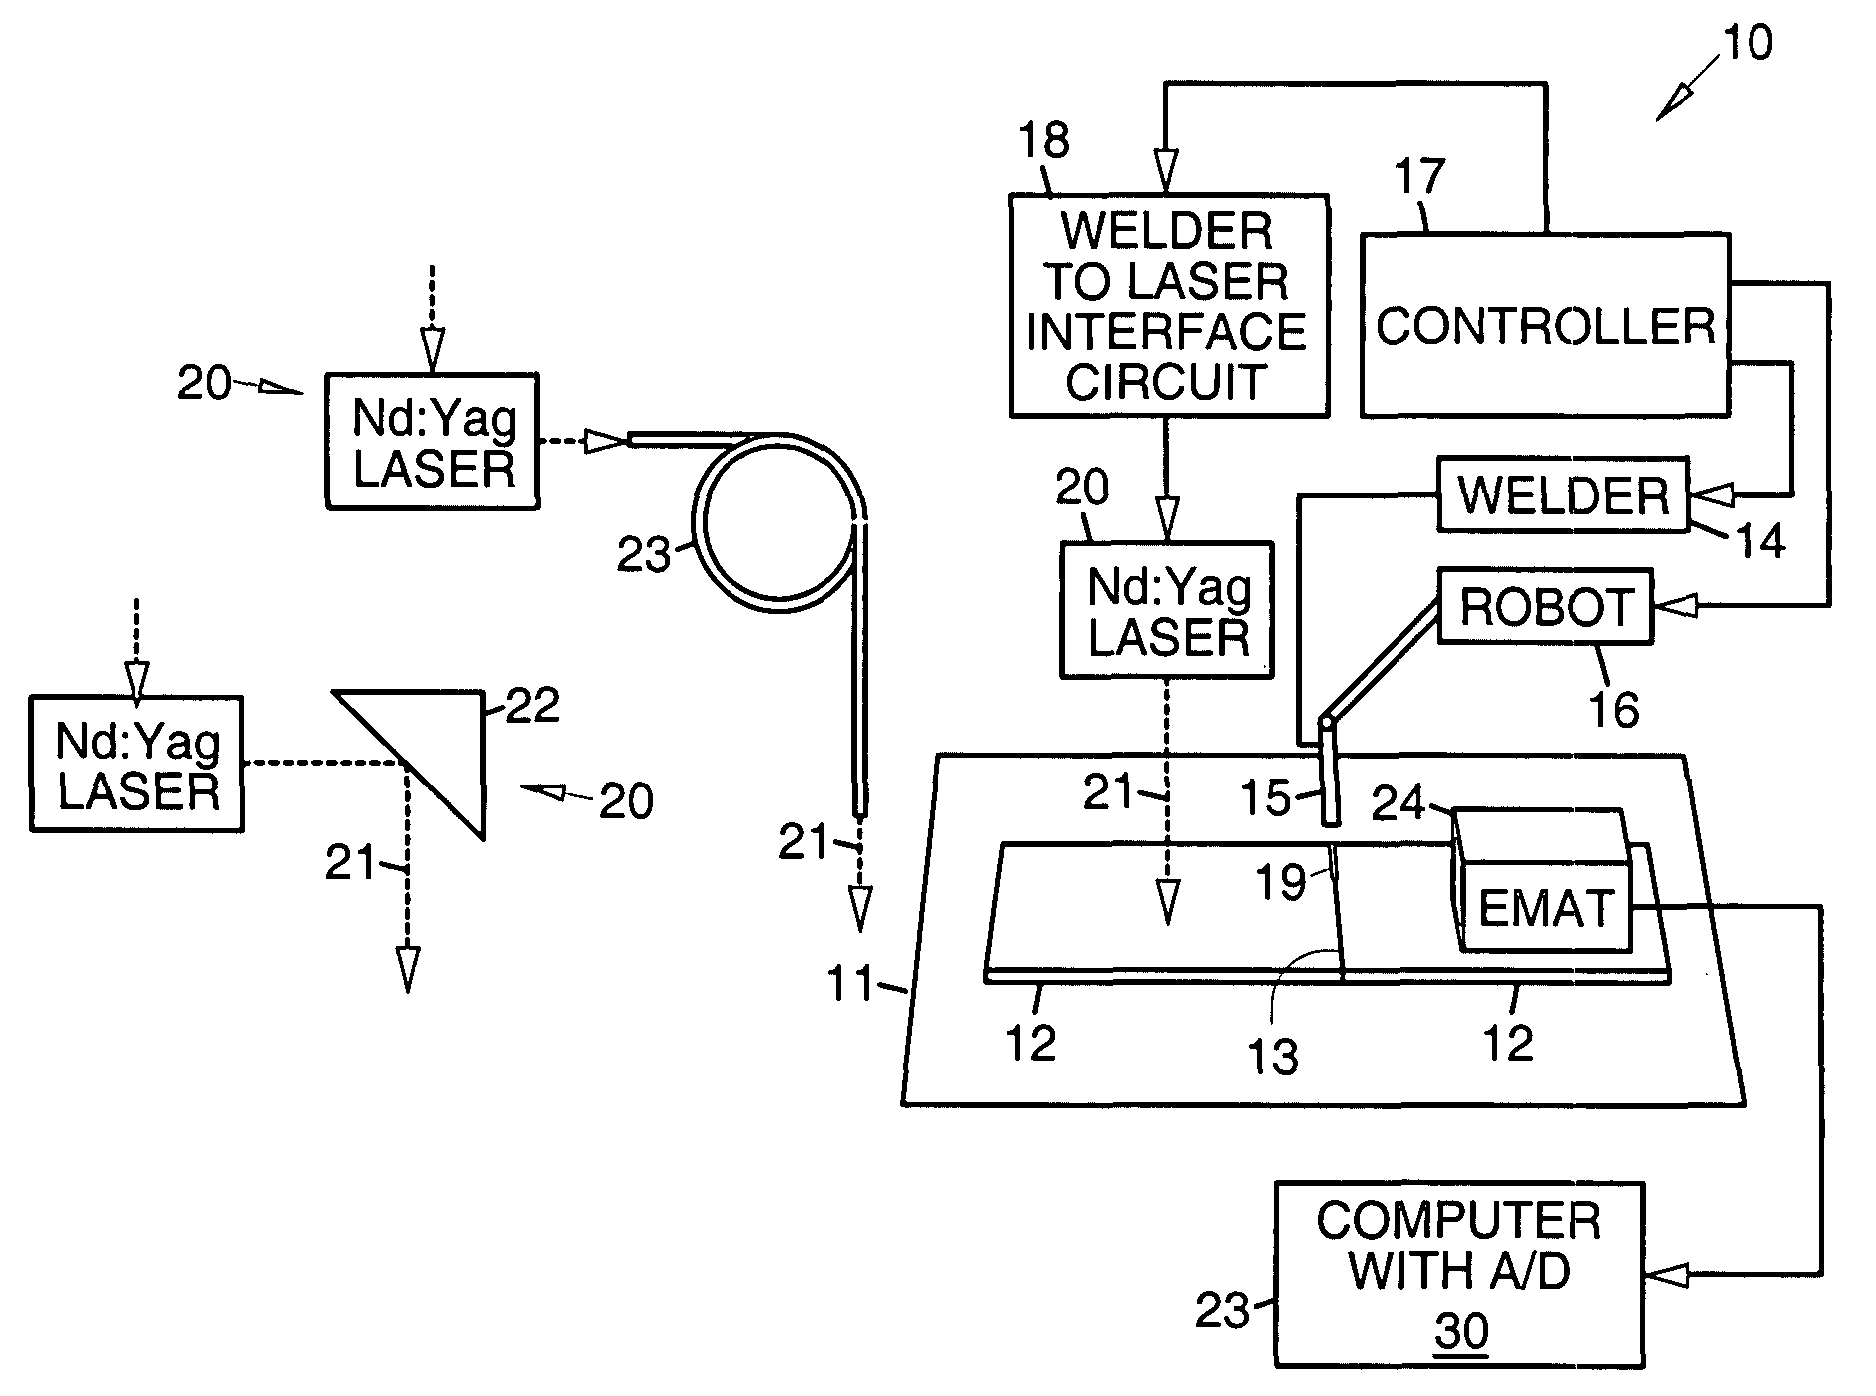 Ultrasound systems and method for measuring weld penetration depth in real time and off line